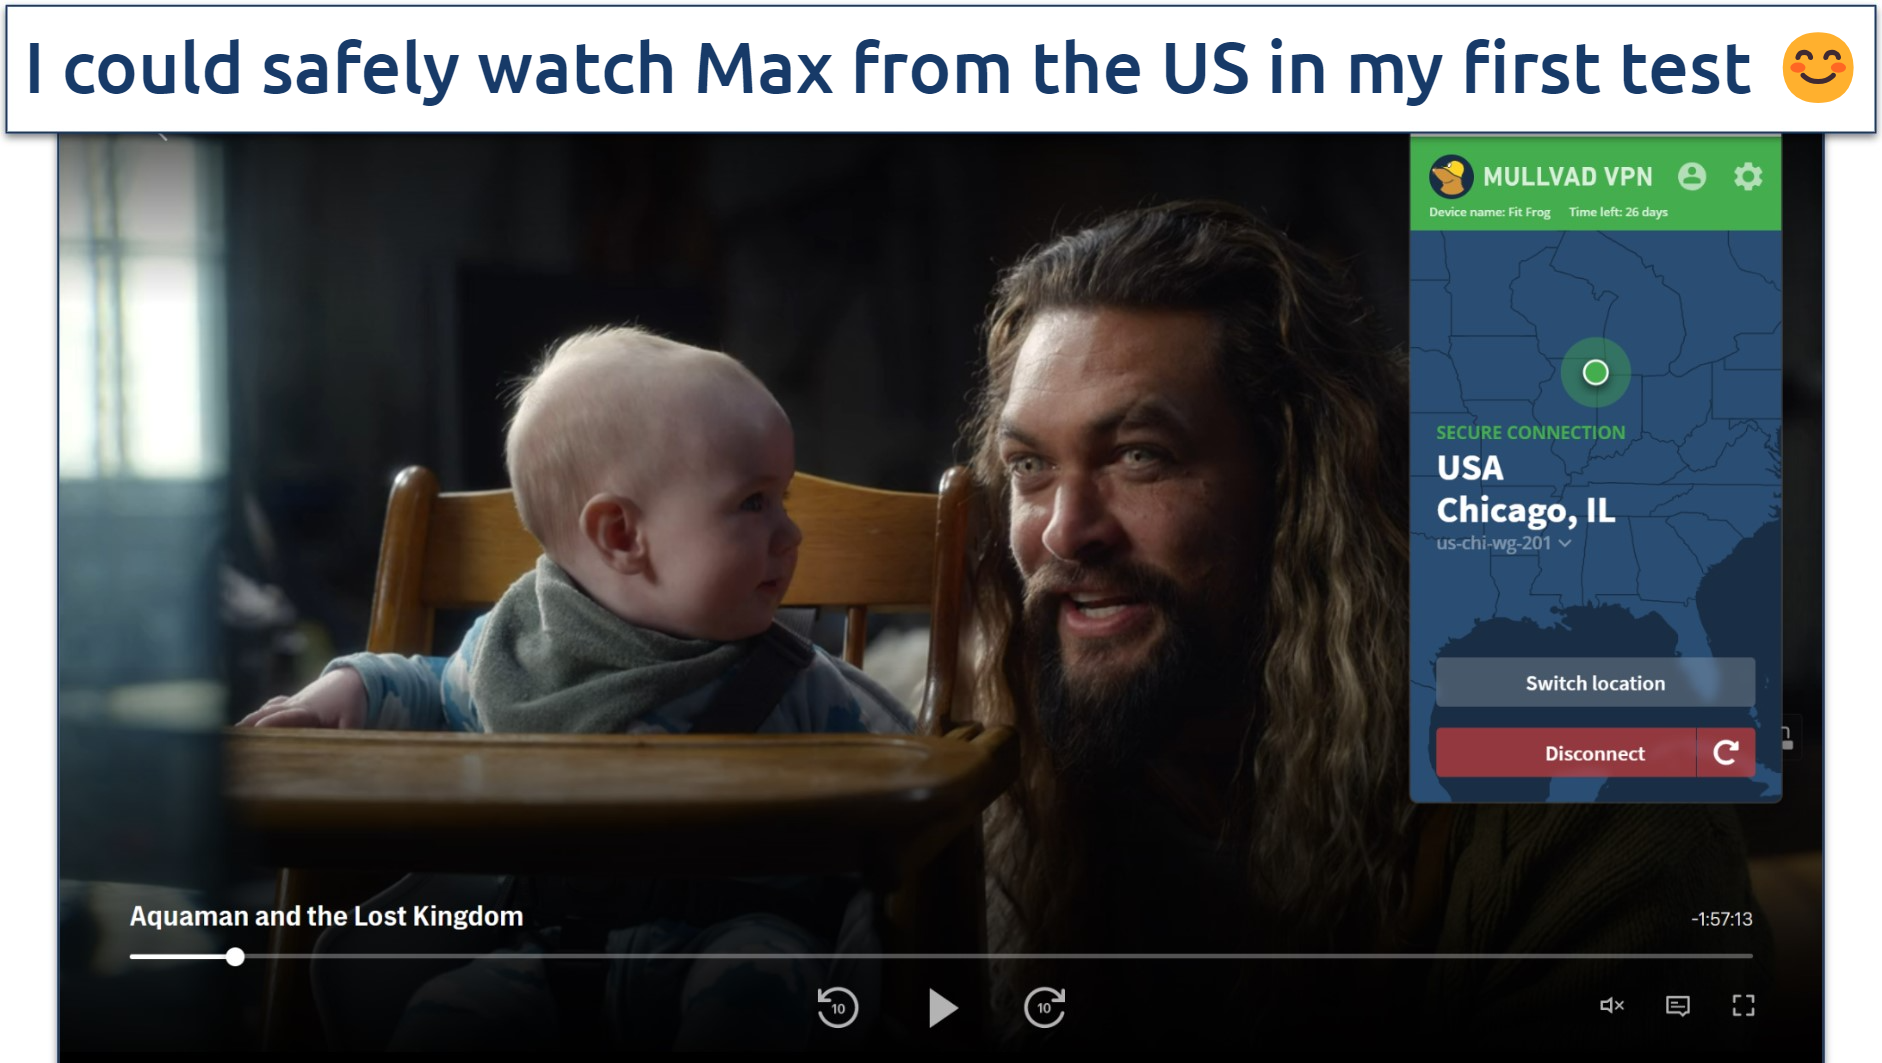 Screenshot of Max player streaming Aquaman and the Lost Kingdom while connected to a Chicago Mullvad server